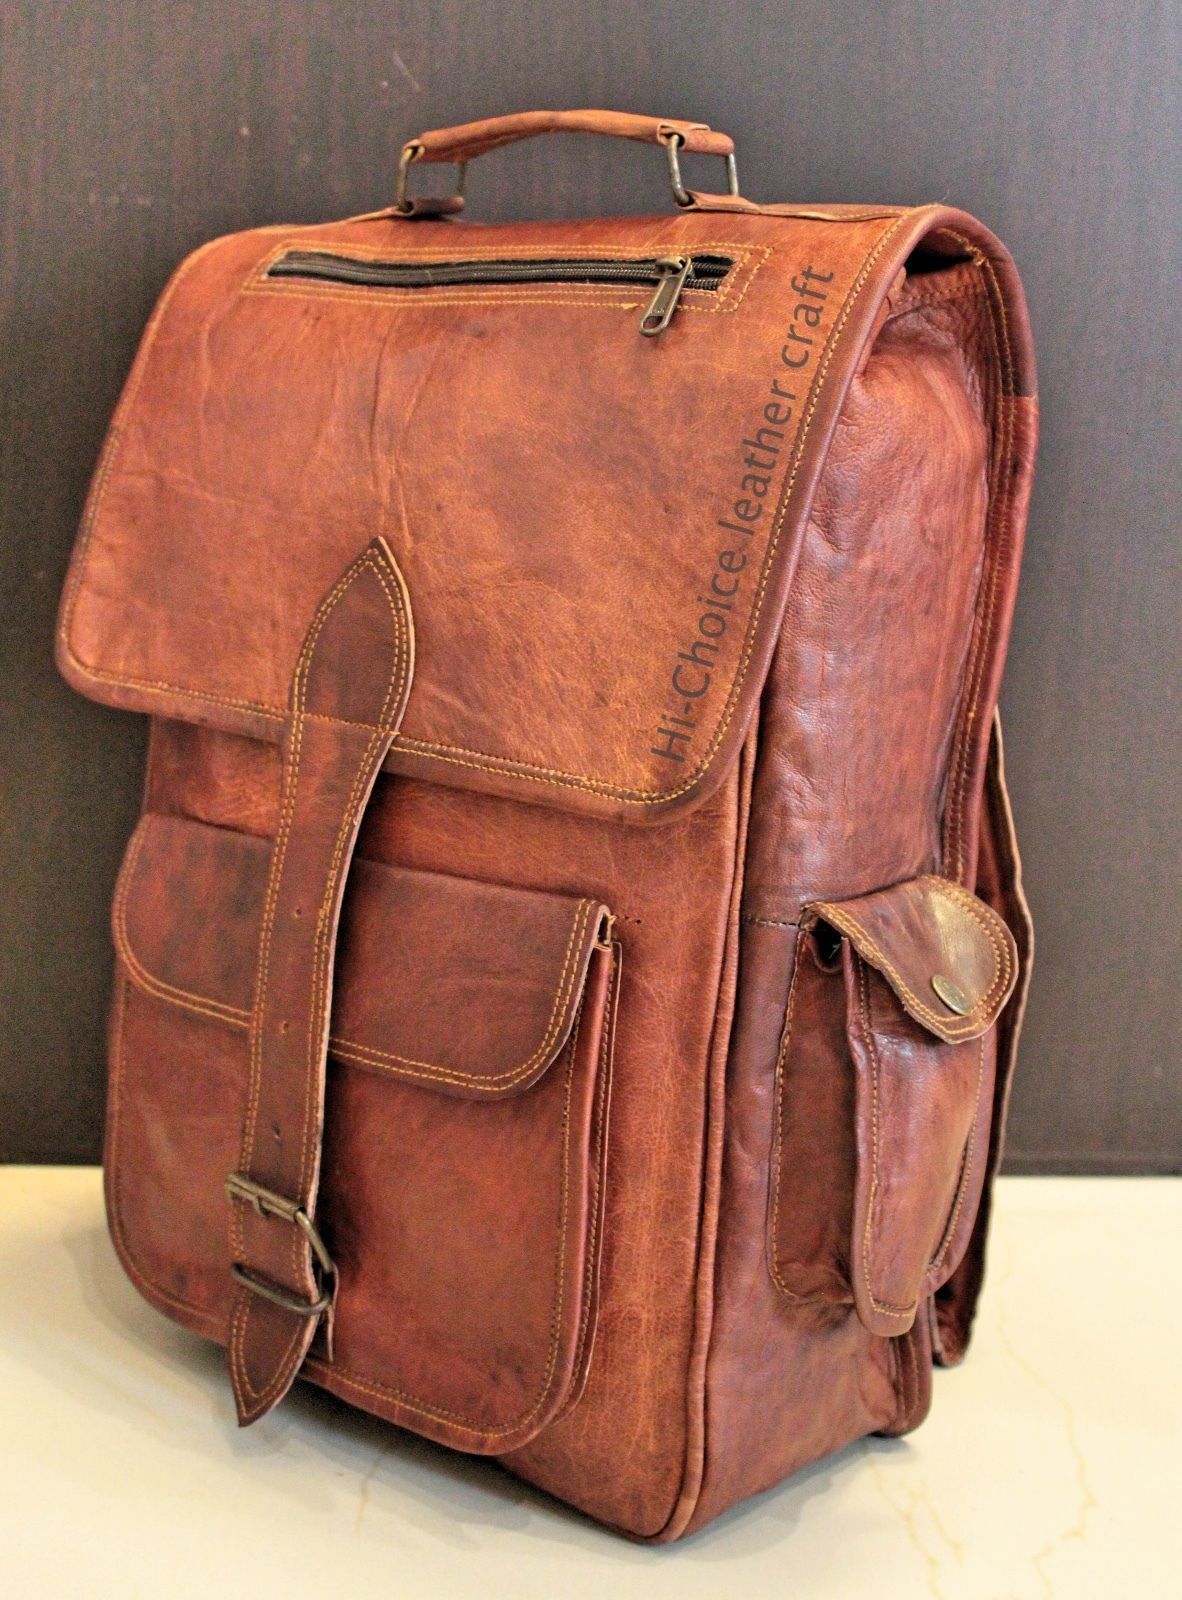 Primary image for New Men's Women's Genuine Leather Travel bag Backpack Day-pack Hiking Camping